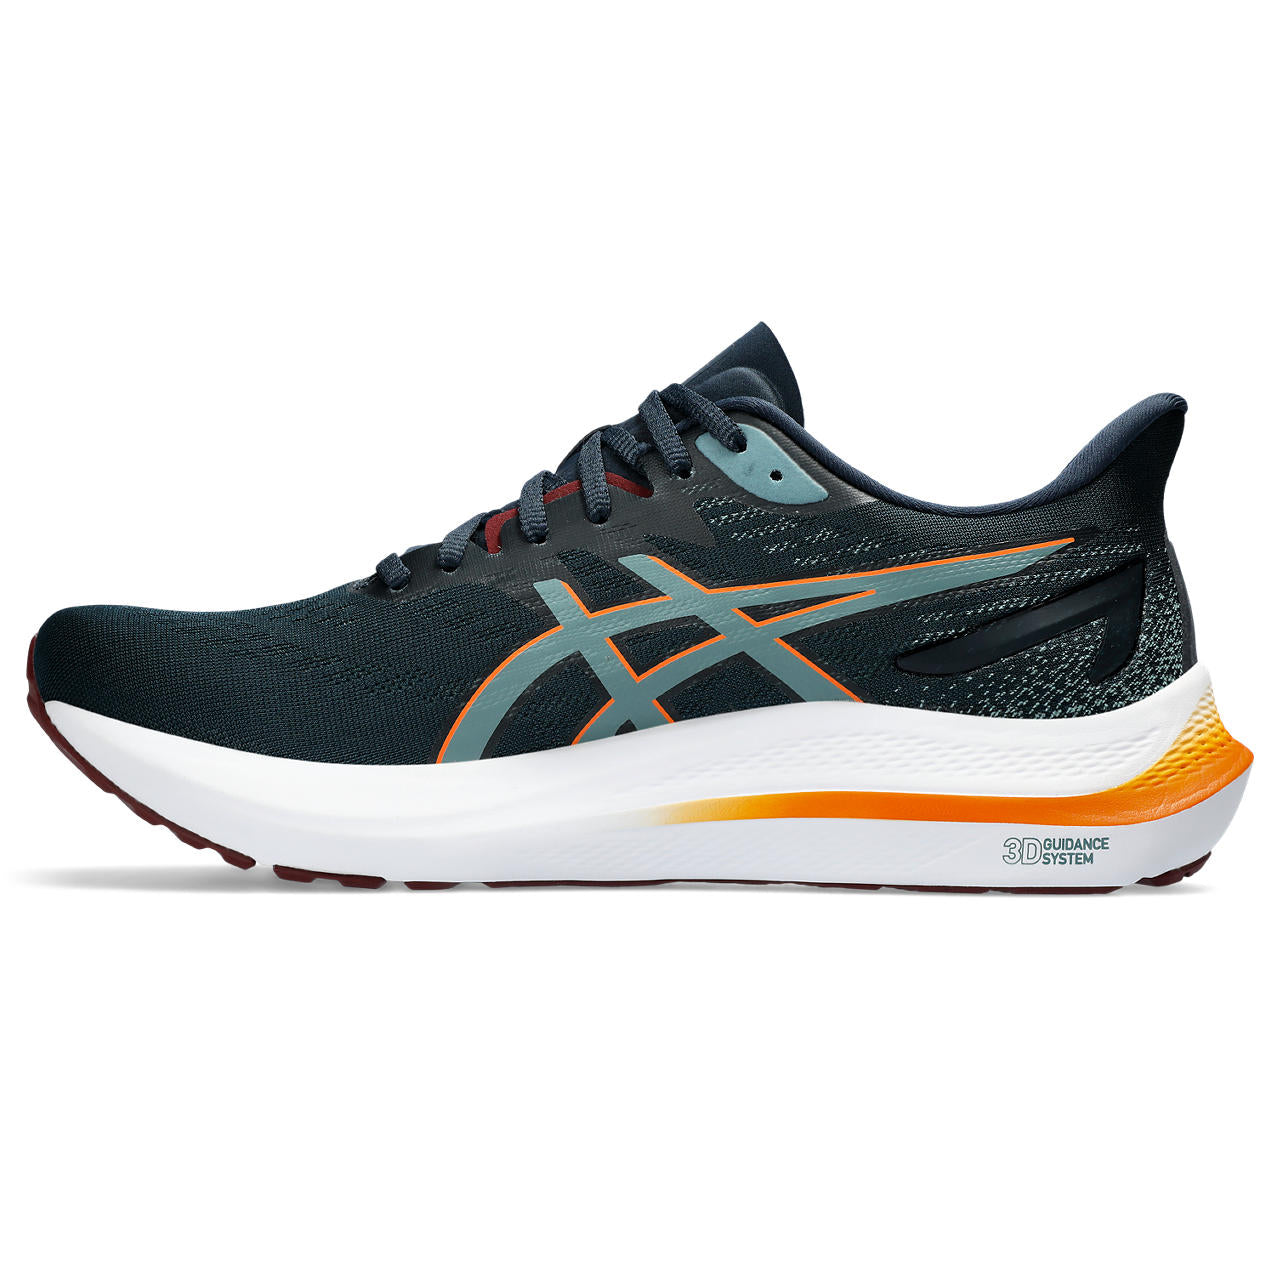 The medial size of te men's GT 2000 has a large ASICS logo